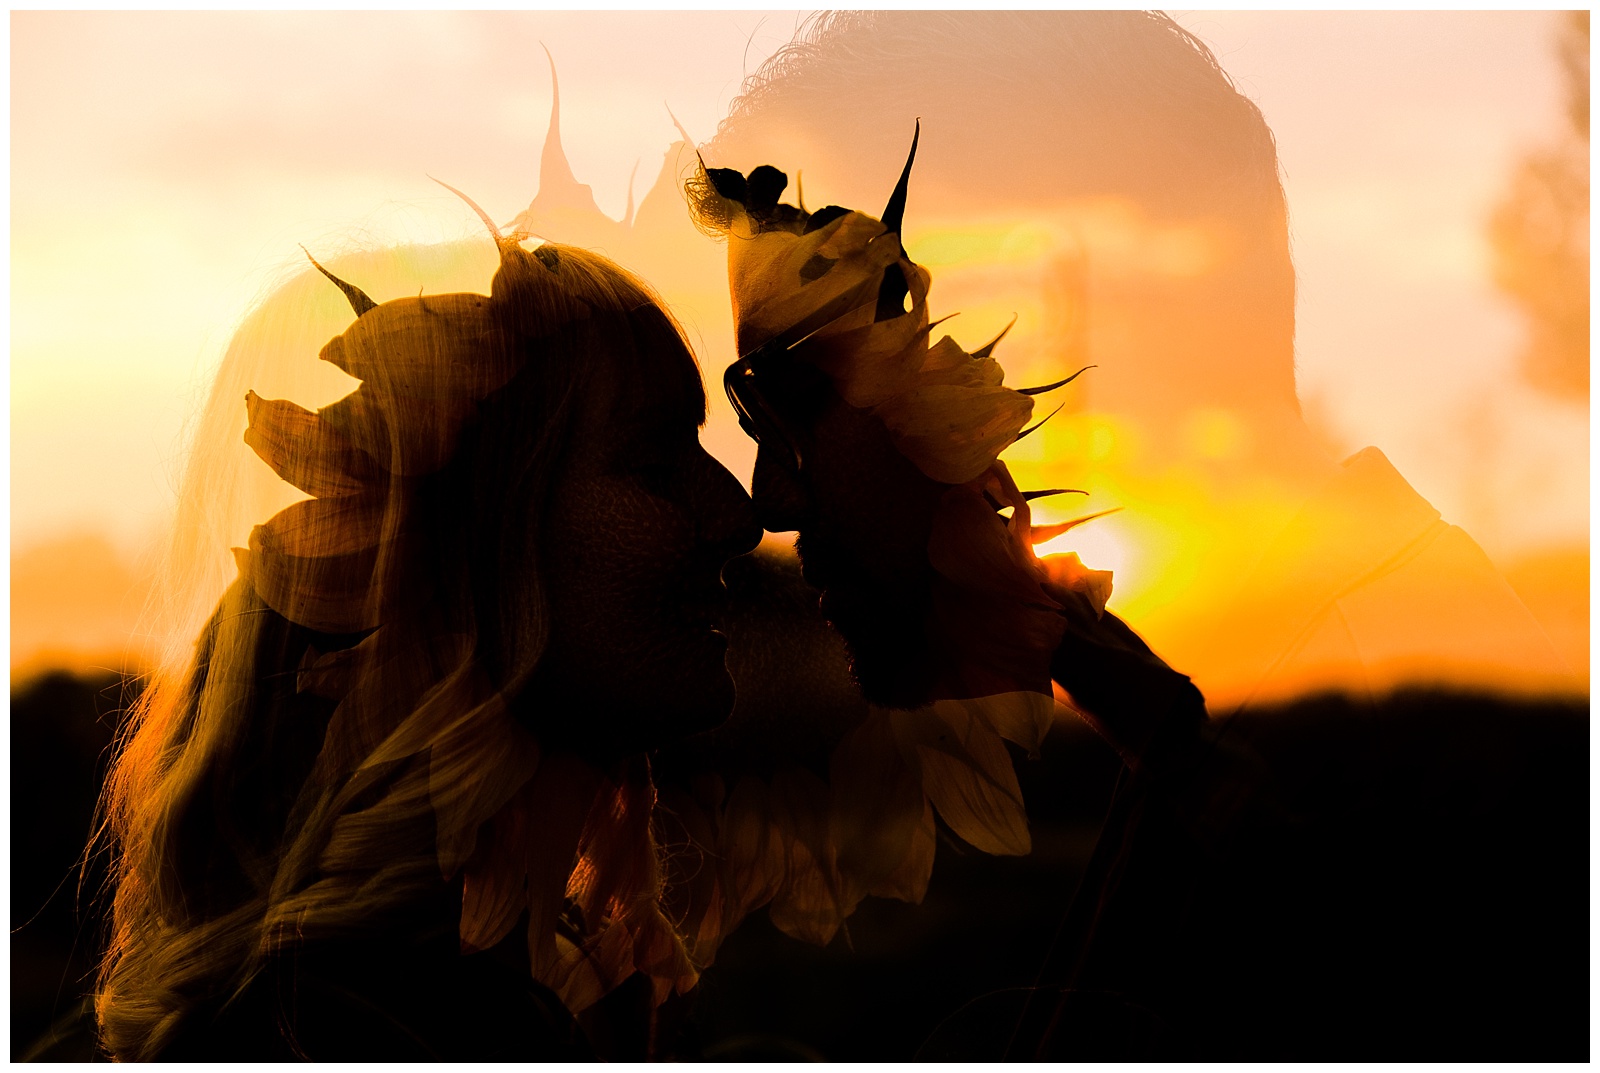 engagement photos in a sunflower field